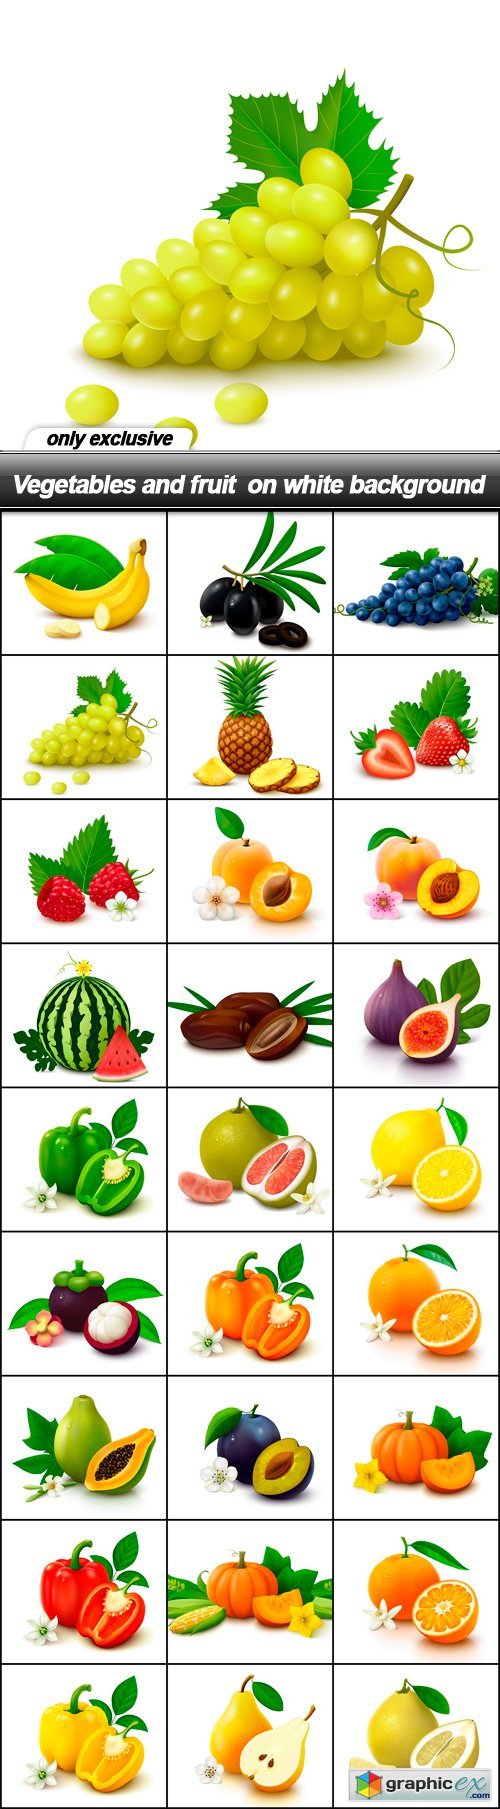 Vegetables and fruit on white background - 27 EPS